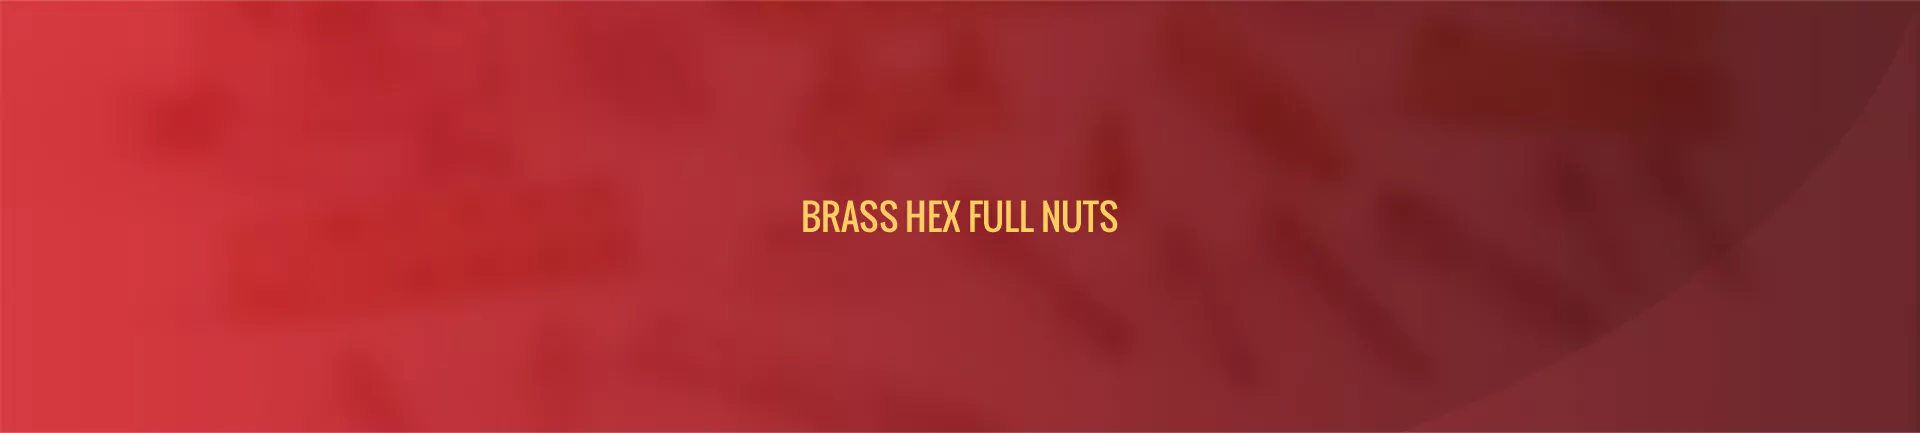 brass-hex-full-nuts-banner